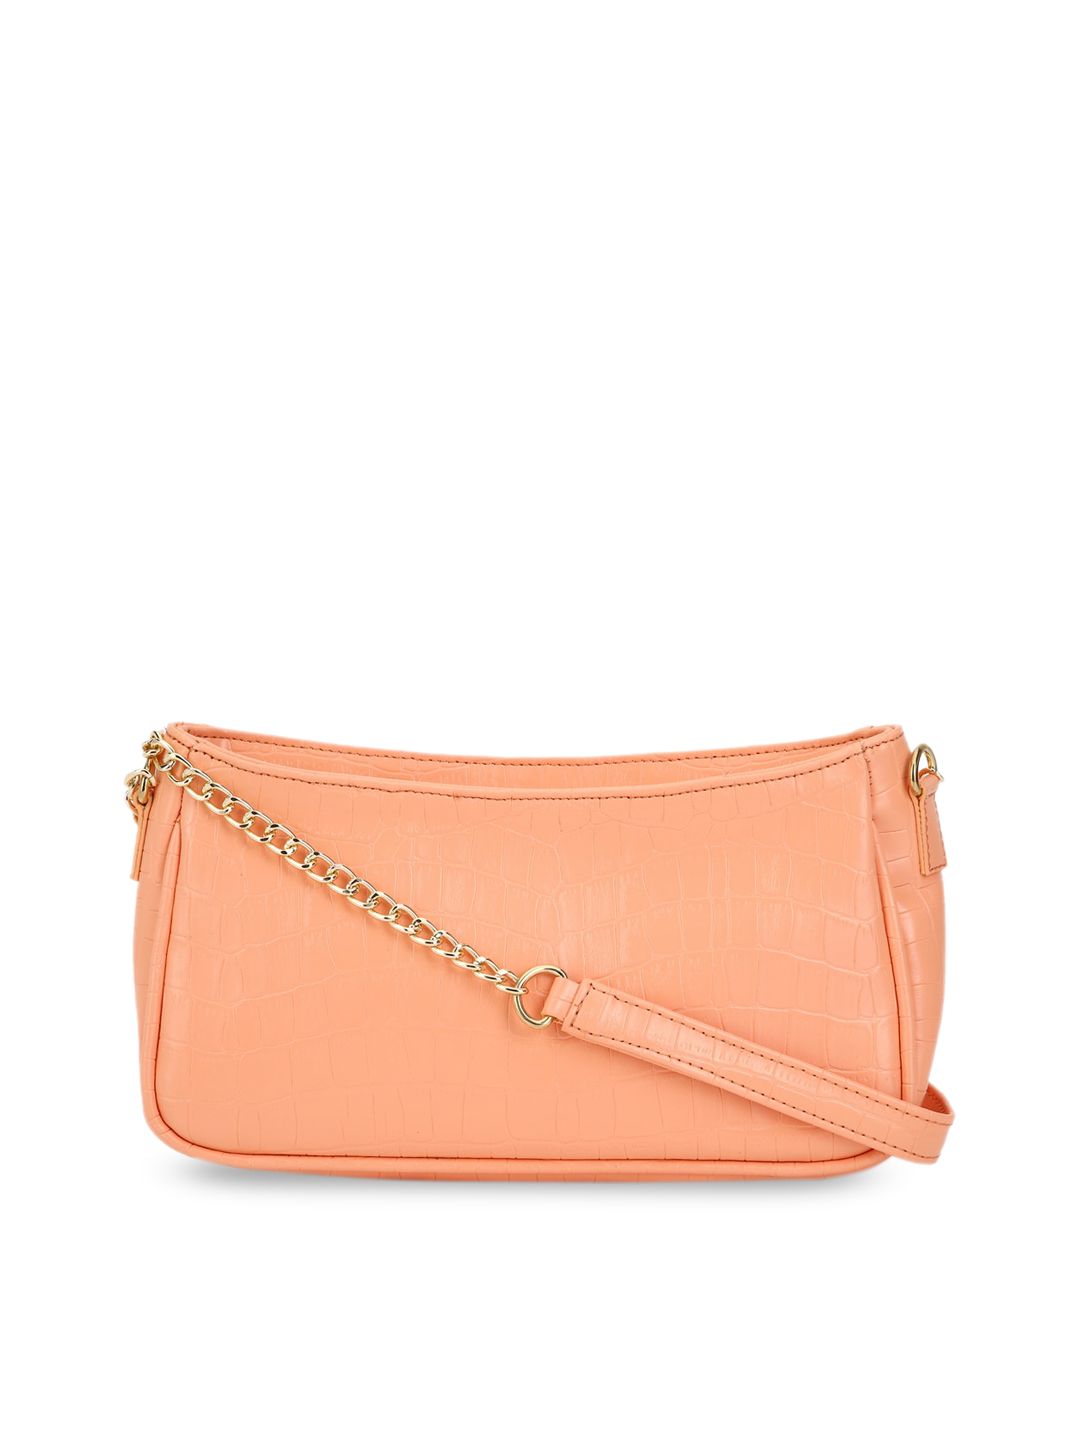 FOREVER 21 Orange PU Structured Sling Bag Price in India